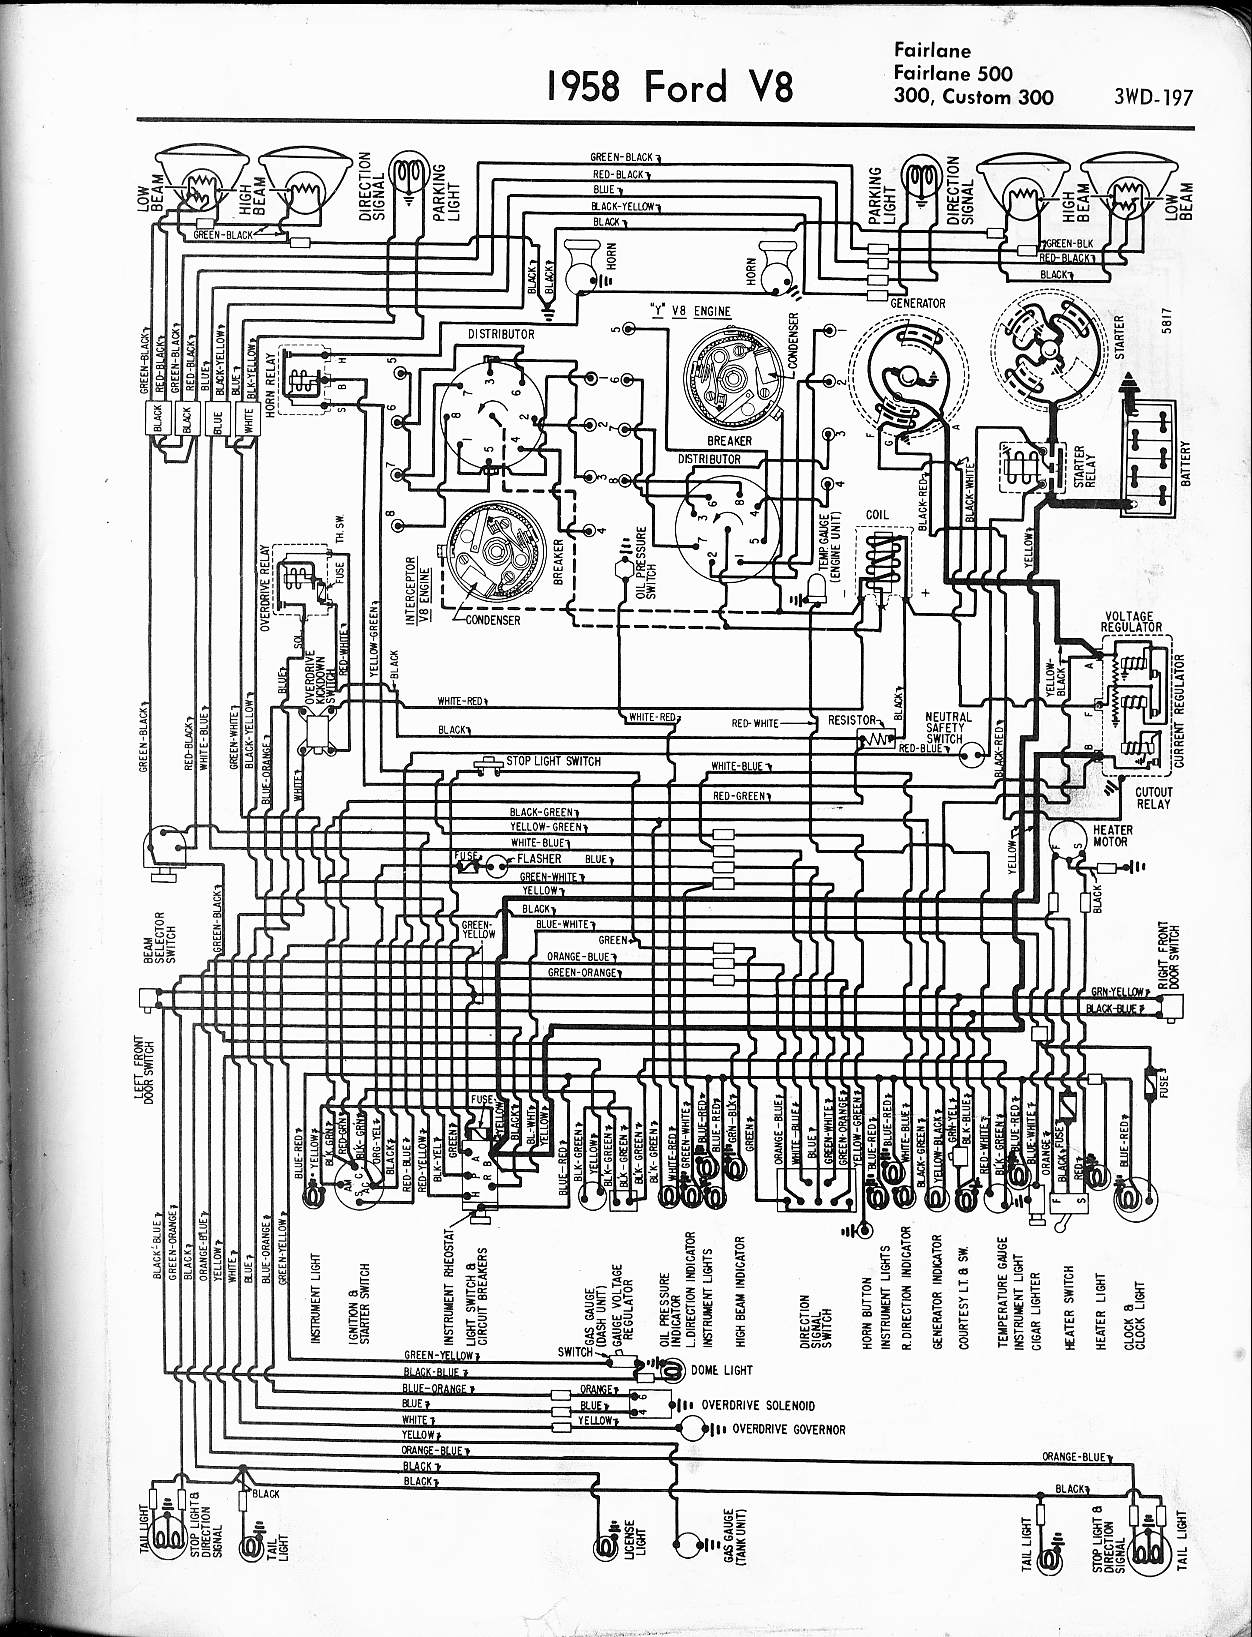 Wiring schematics for a ford #3